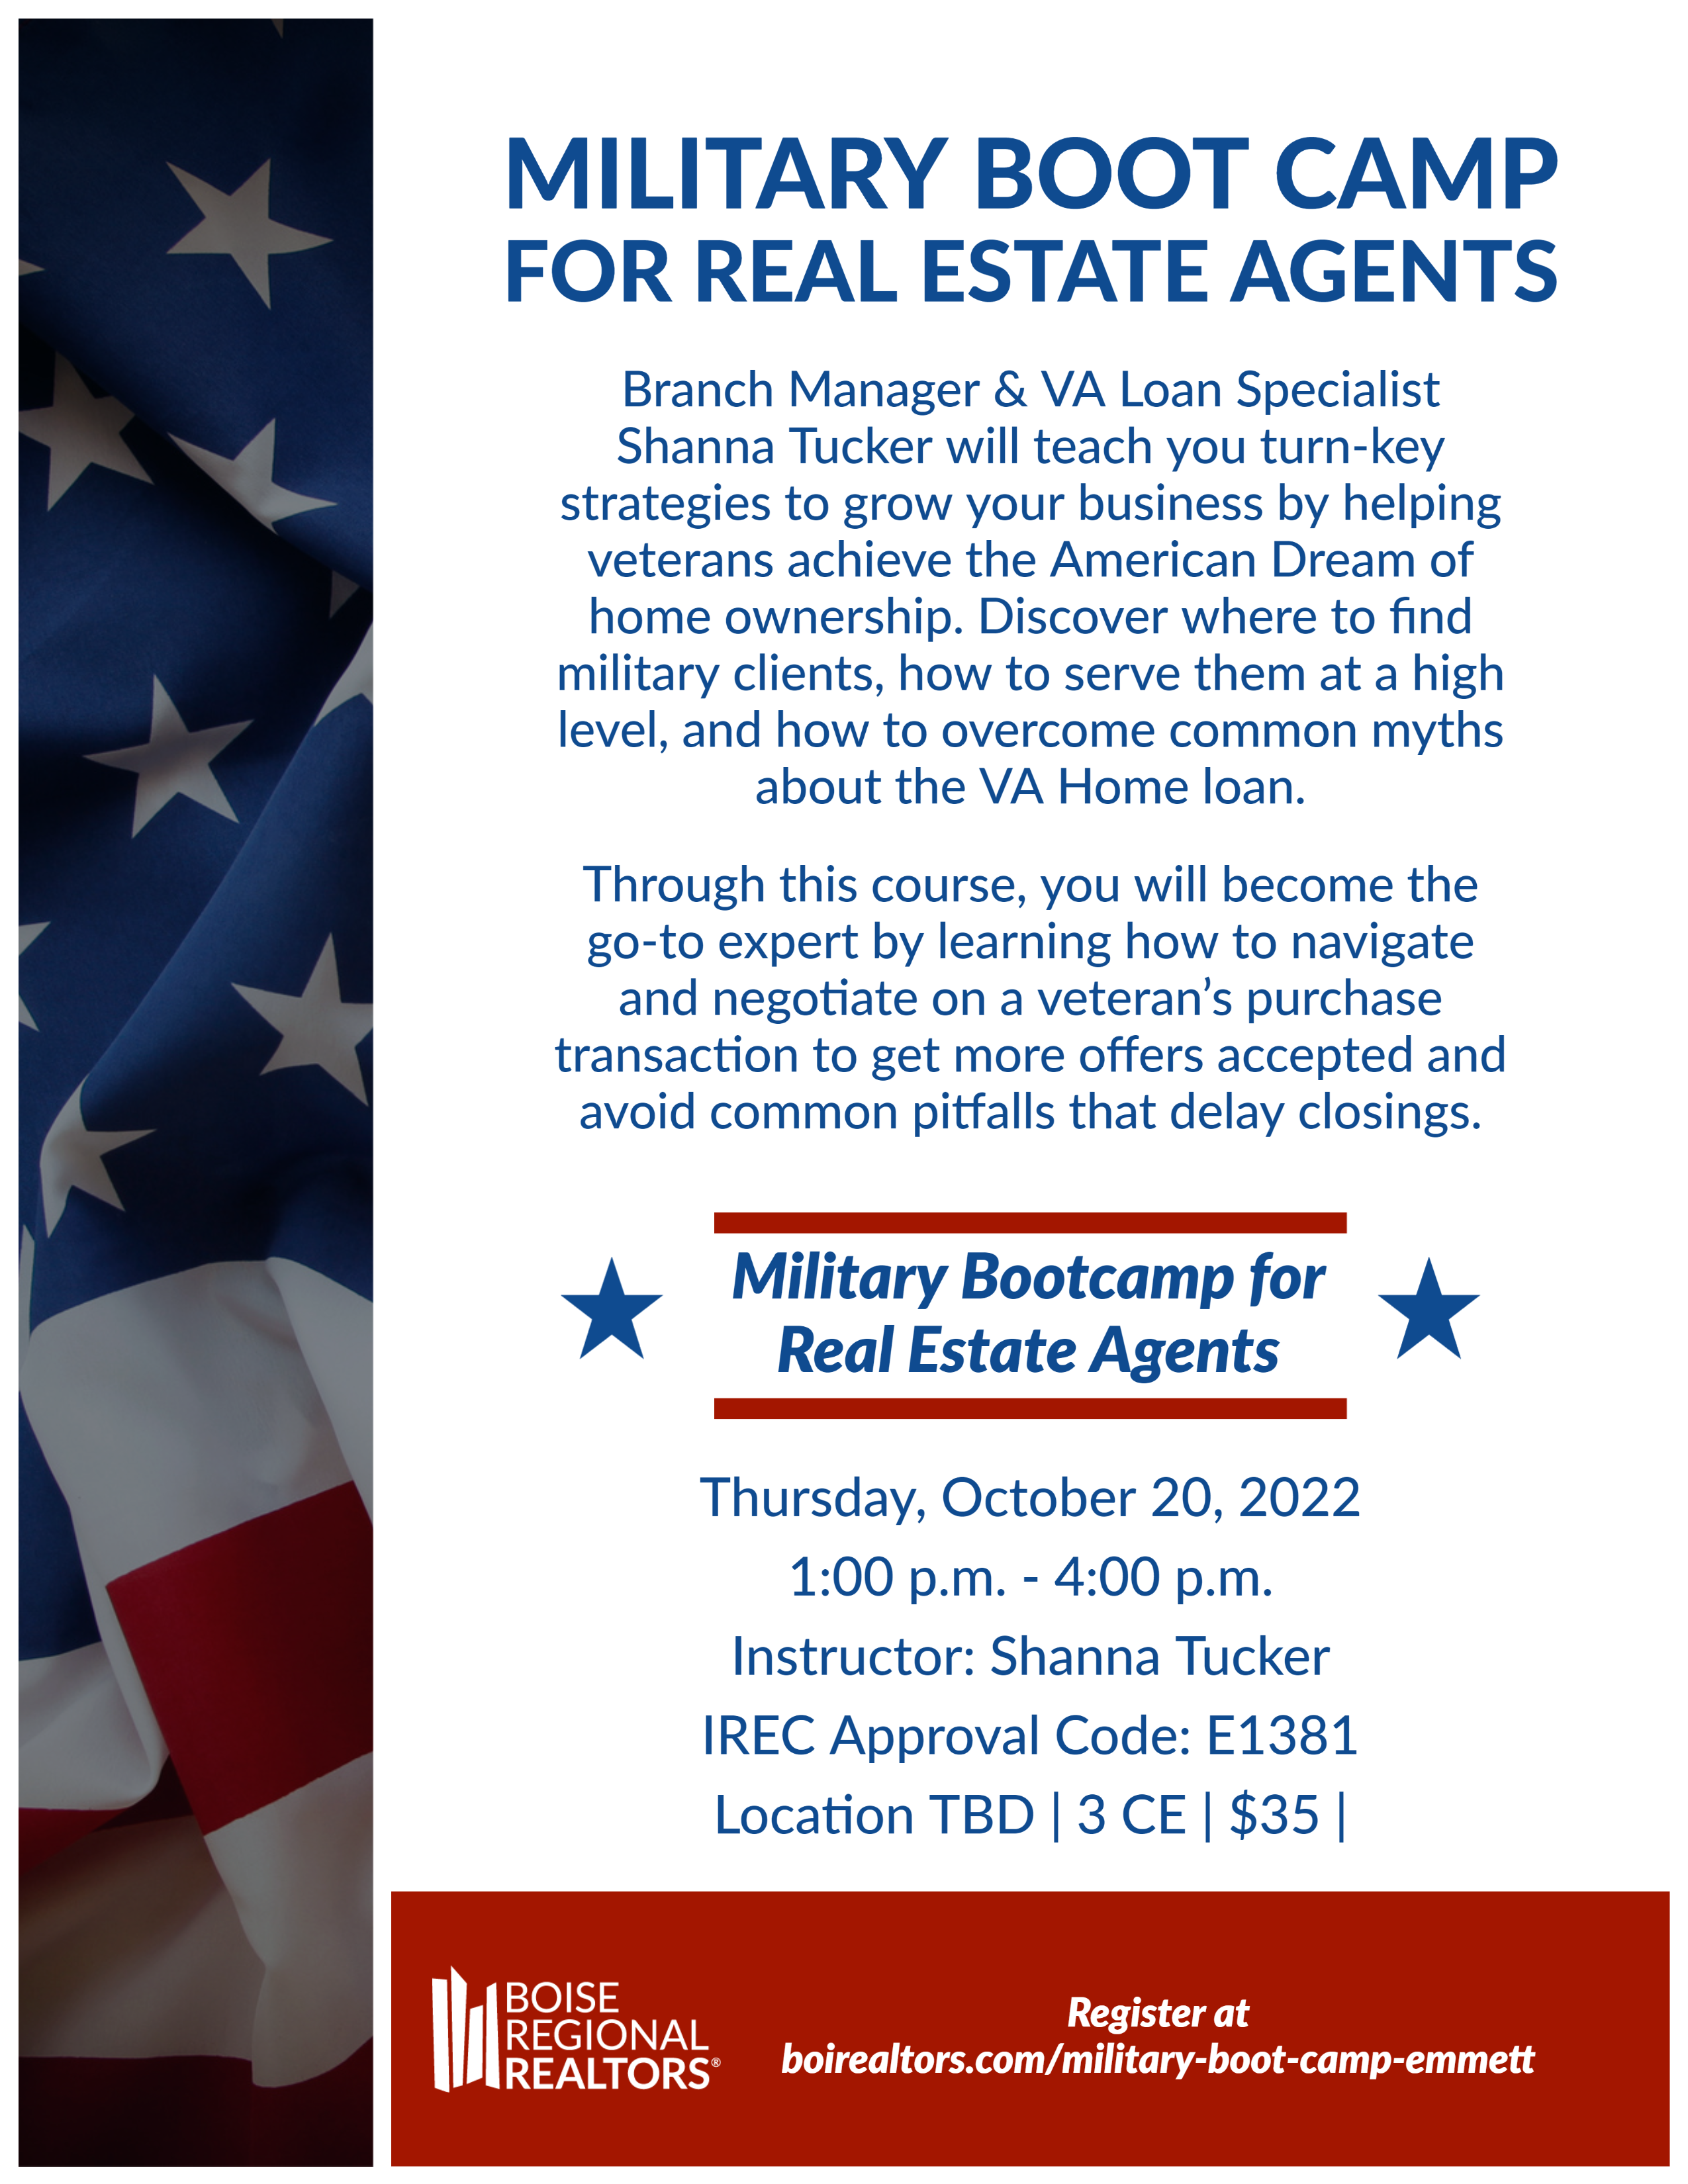 Military Boot Camp for Real Estate Agents - Emmett 10.20.22